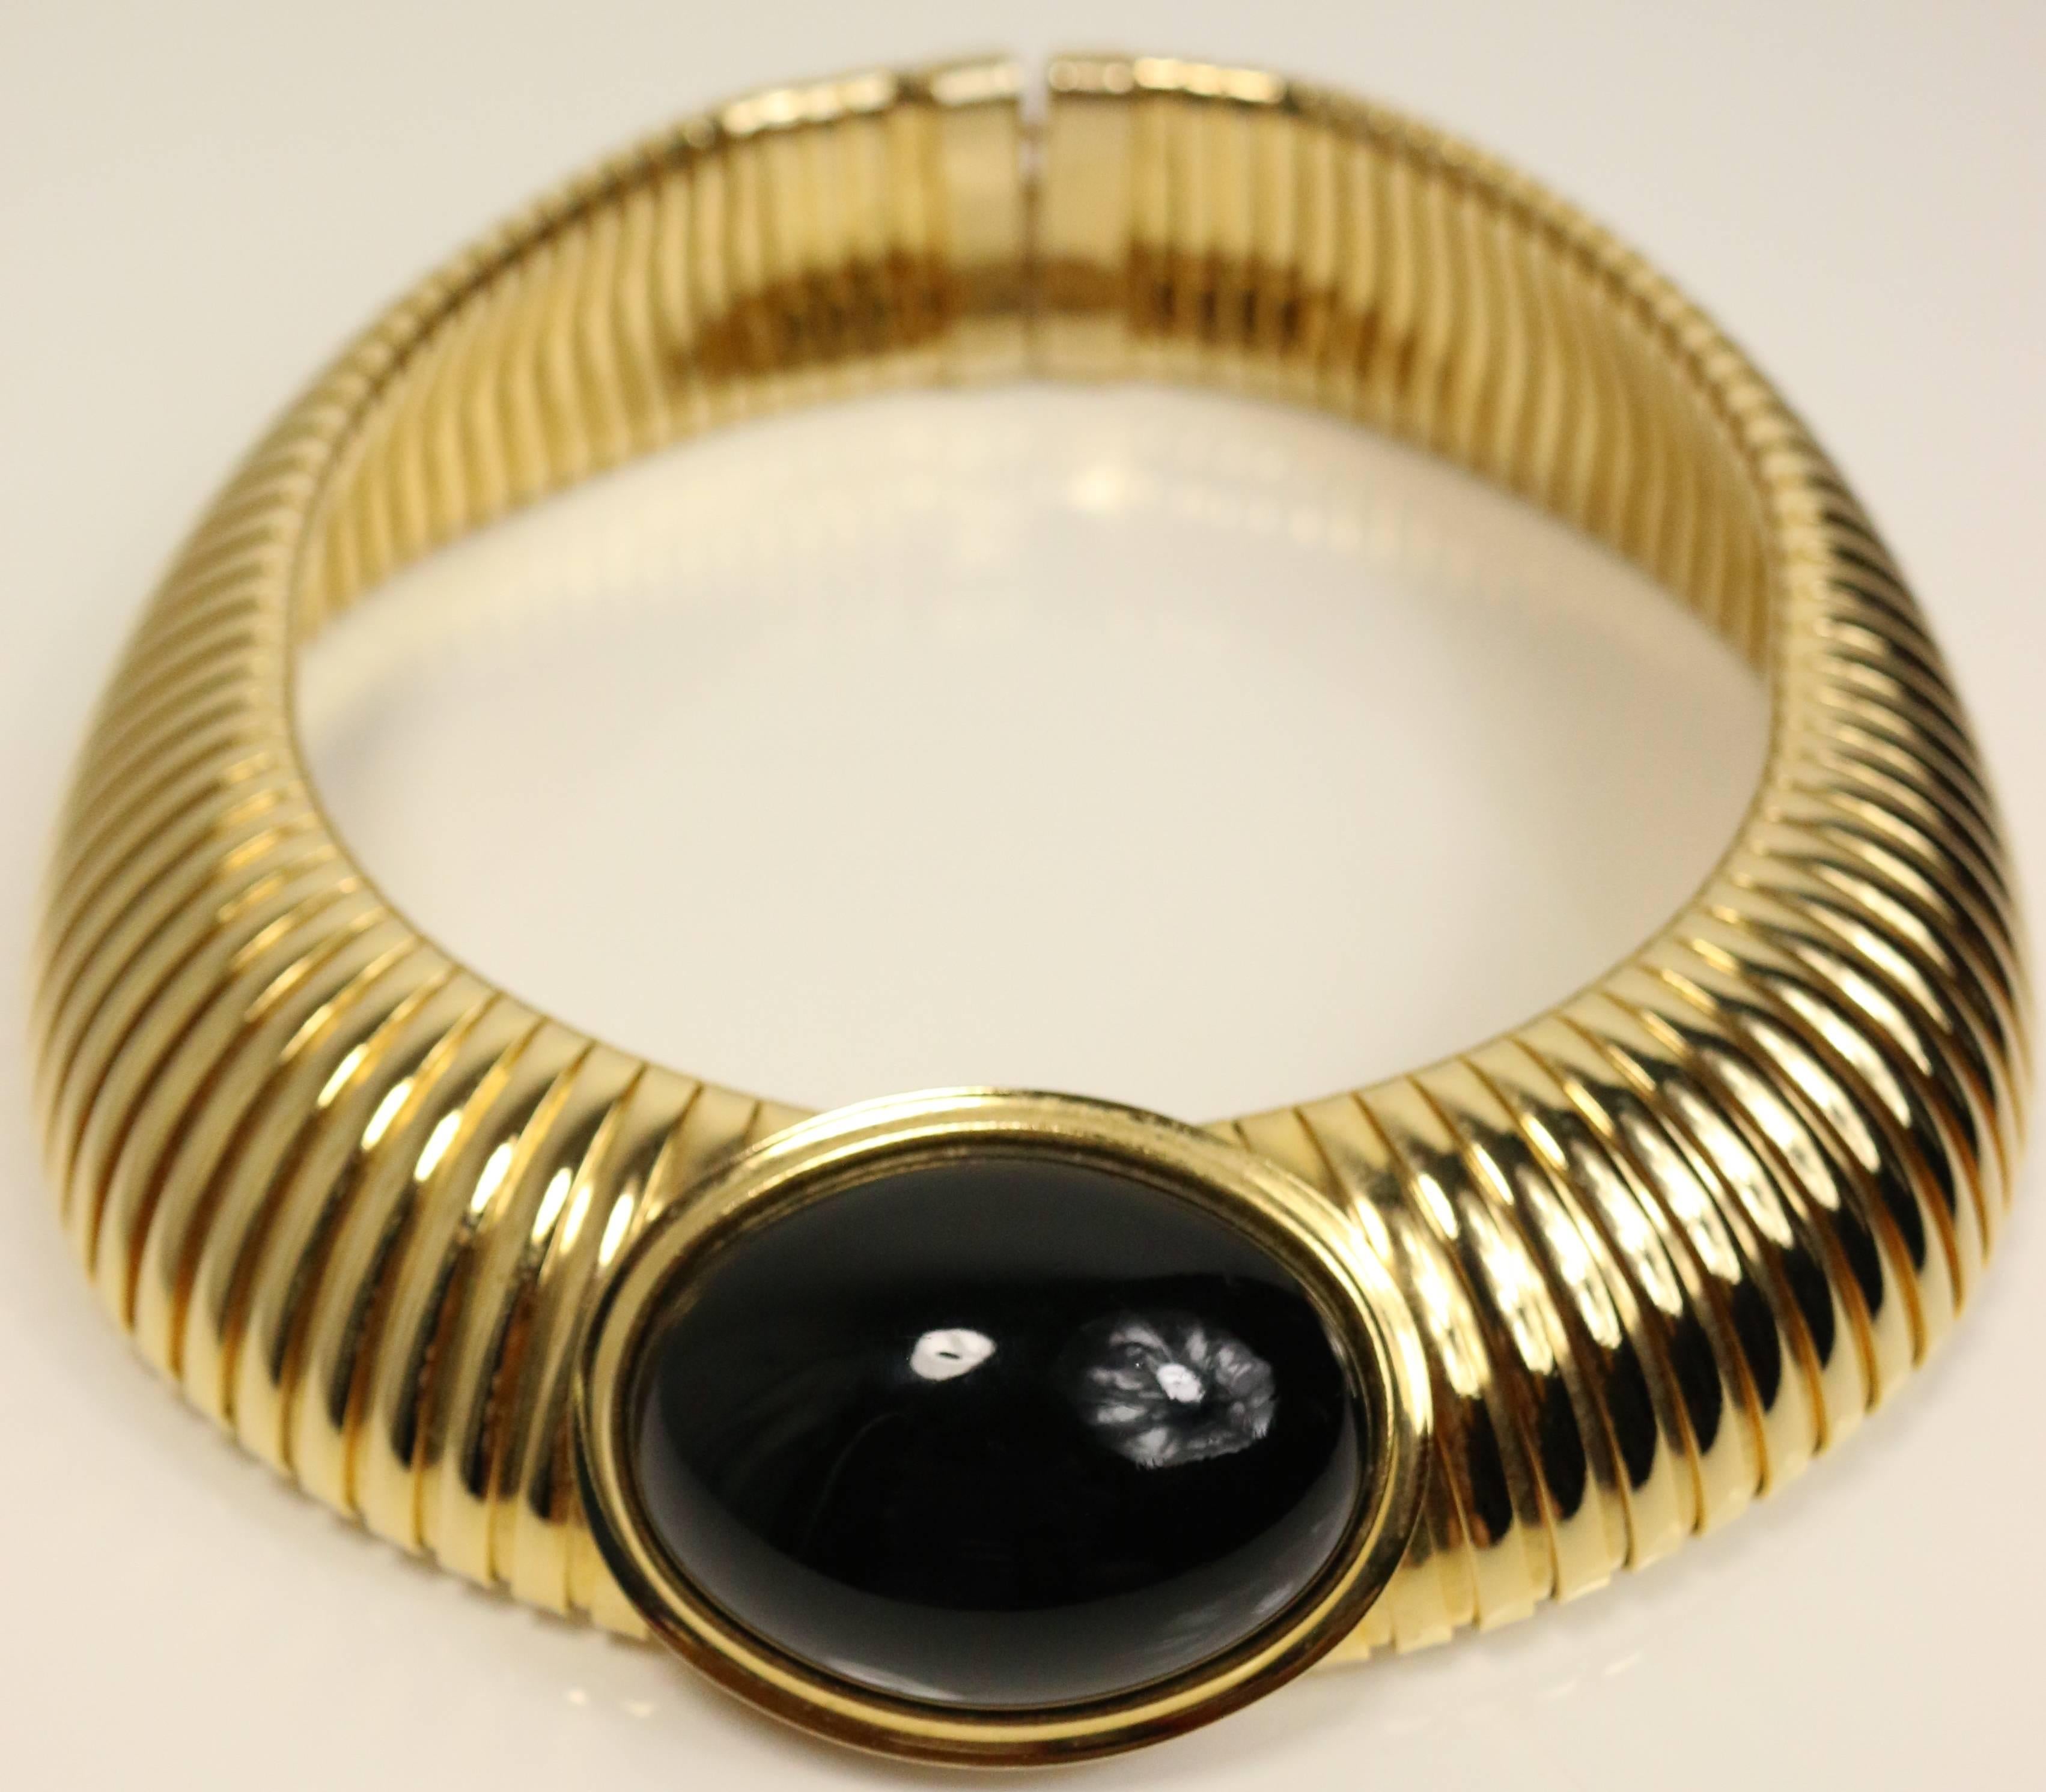 -Vintage Gold Toned Hardware Choker Necklace.


- Length: 17.5 inches. Width: 1.5 inches. 
